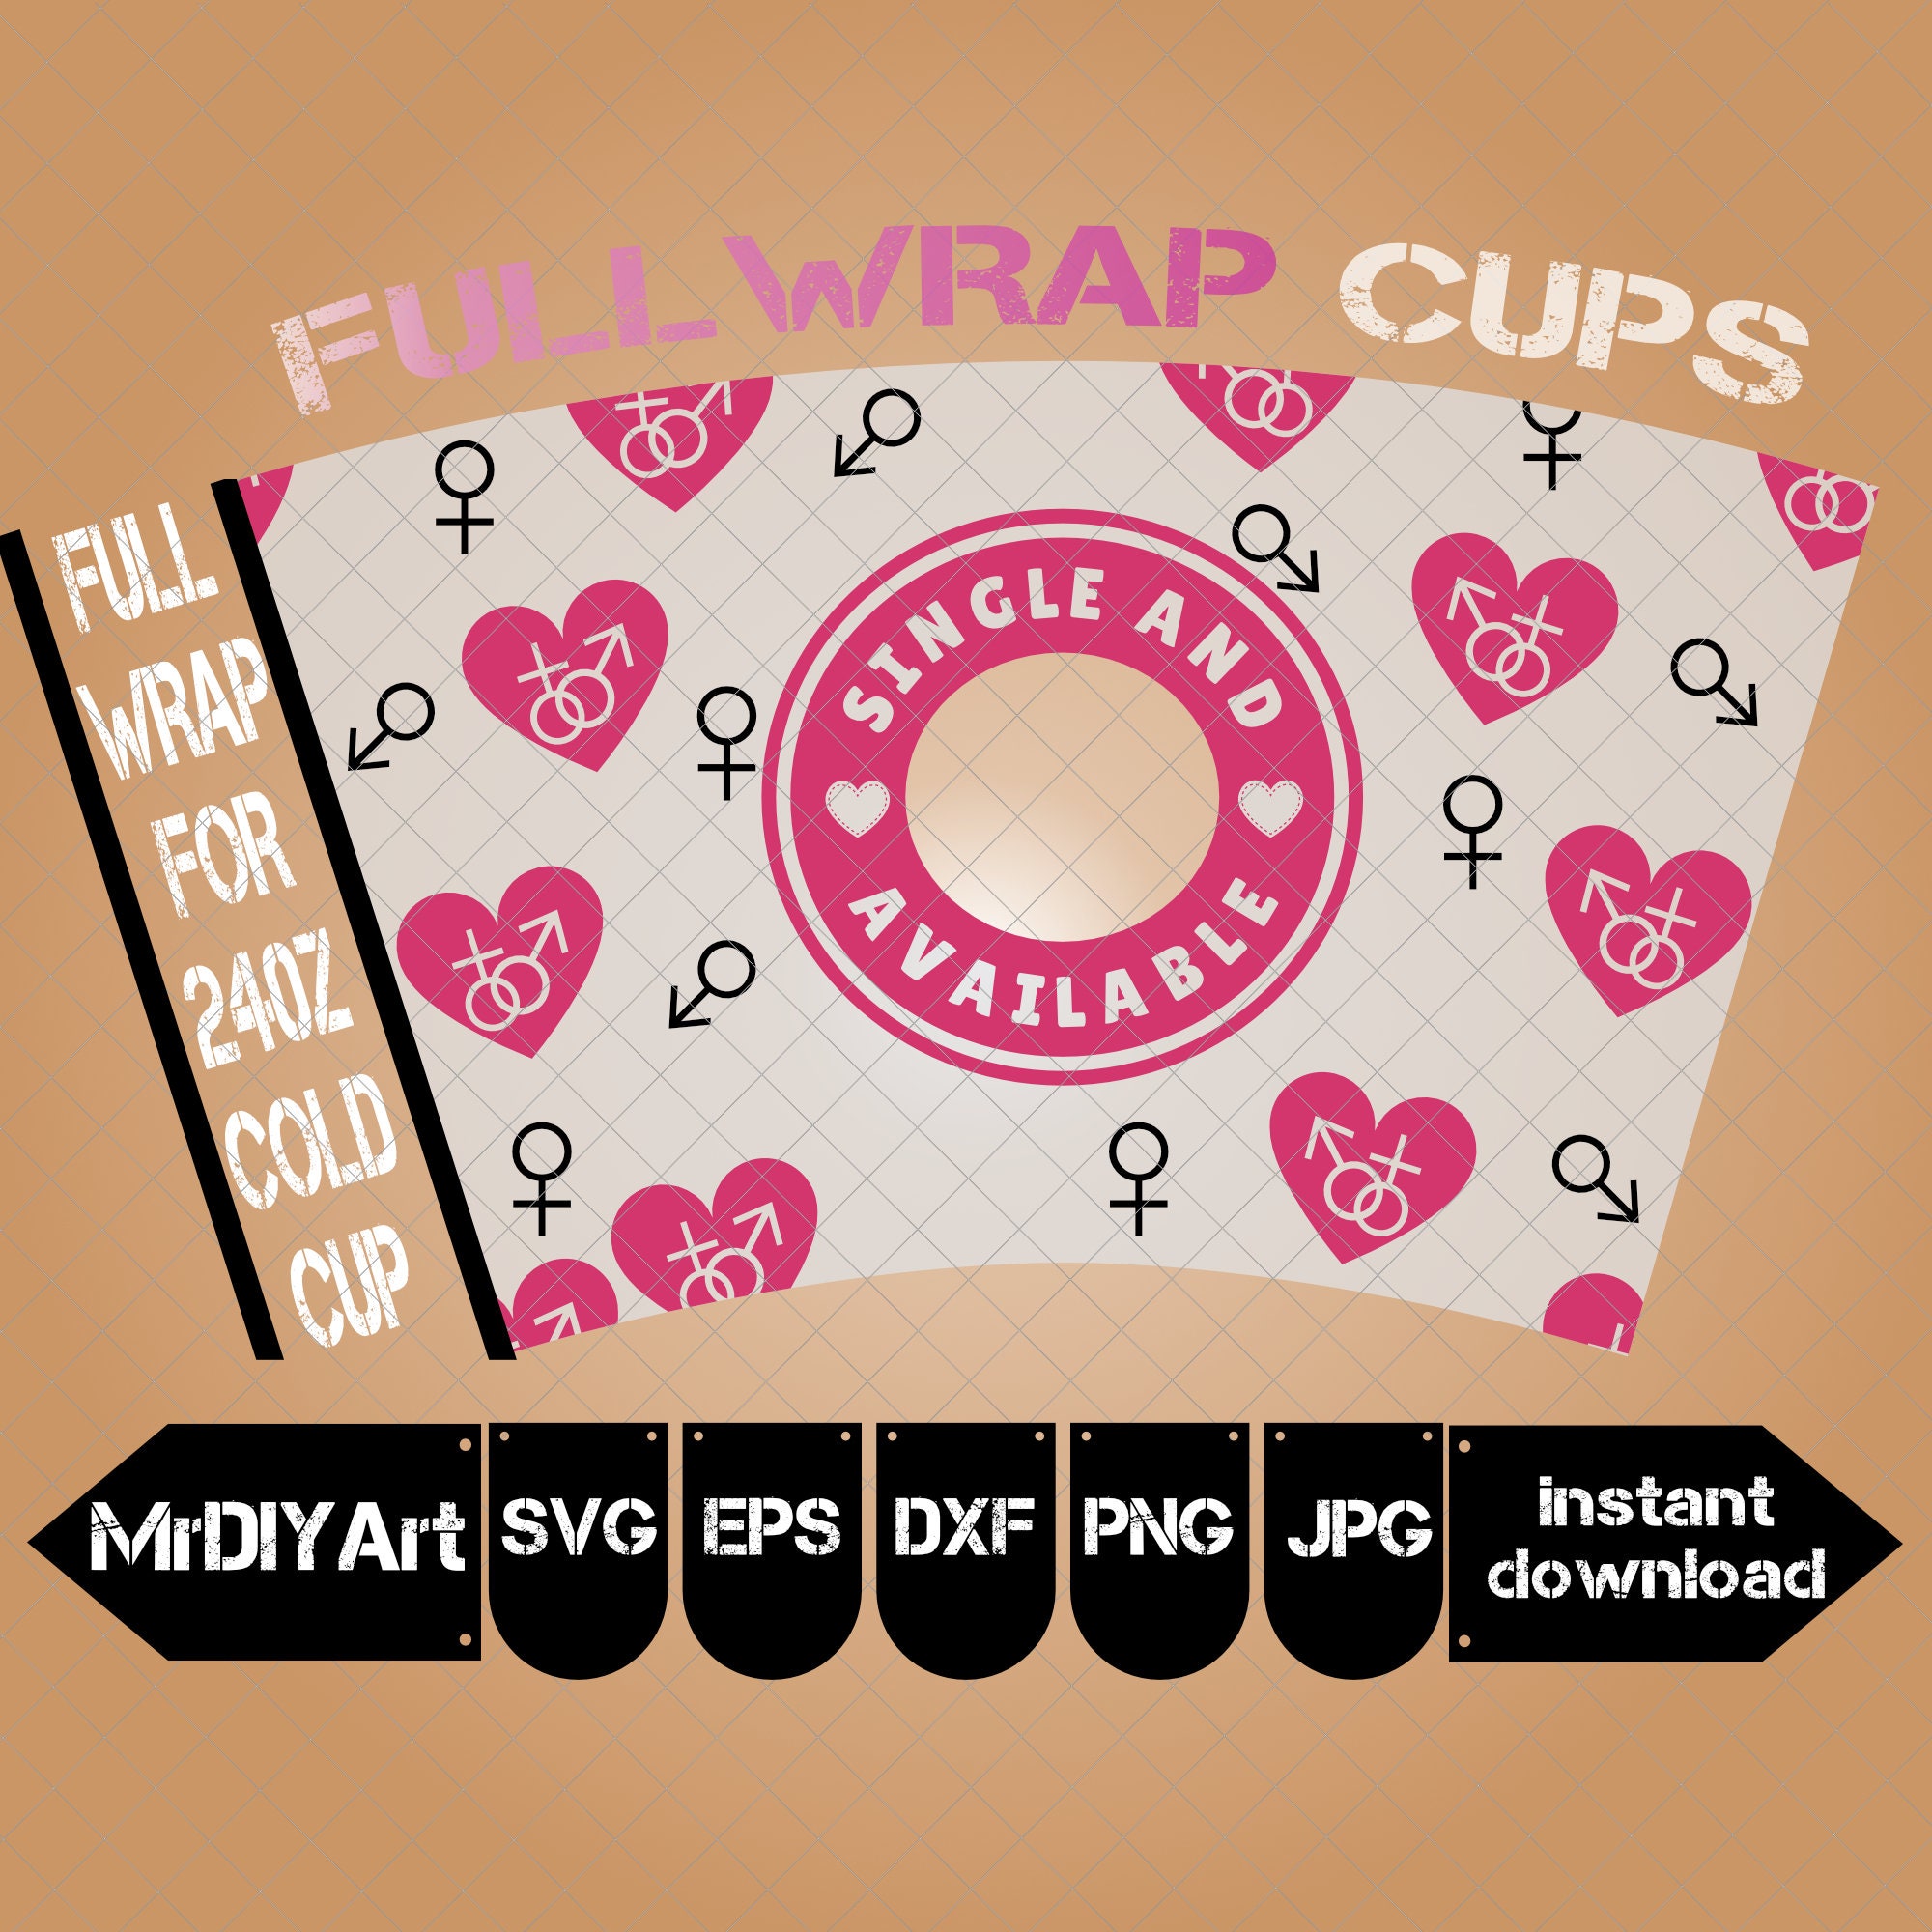 Valentine Set Full Wrap Cold Cup Svg SVG Files Full Wrap for | Etsy